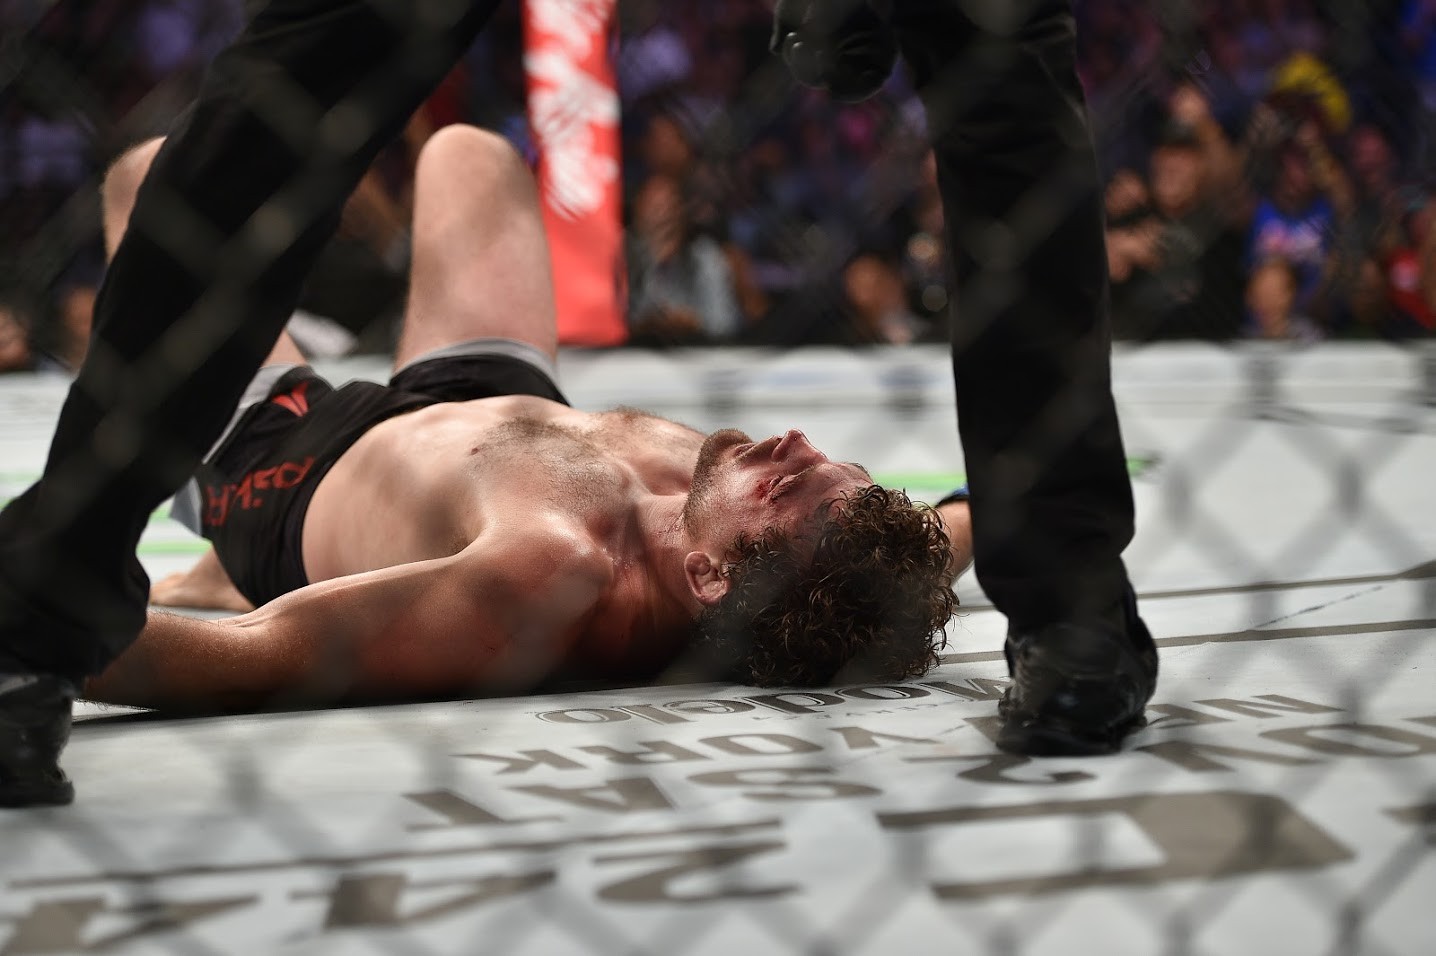 Ben Askren lies down on the canvas after tapping out to Demian Maia. Photo: SingaporeMaven